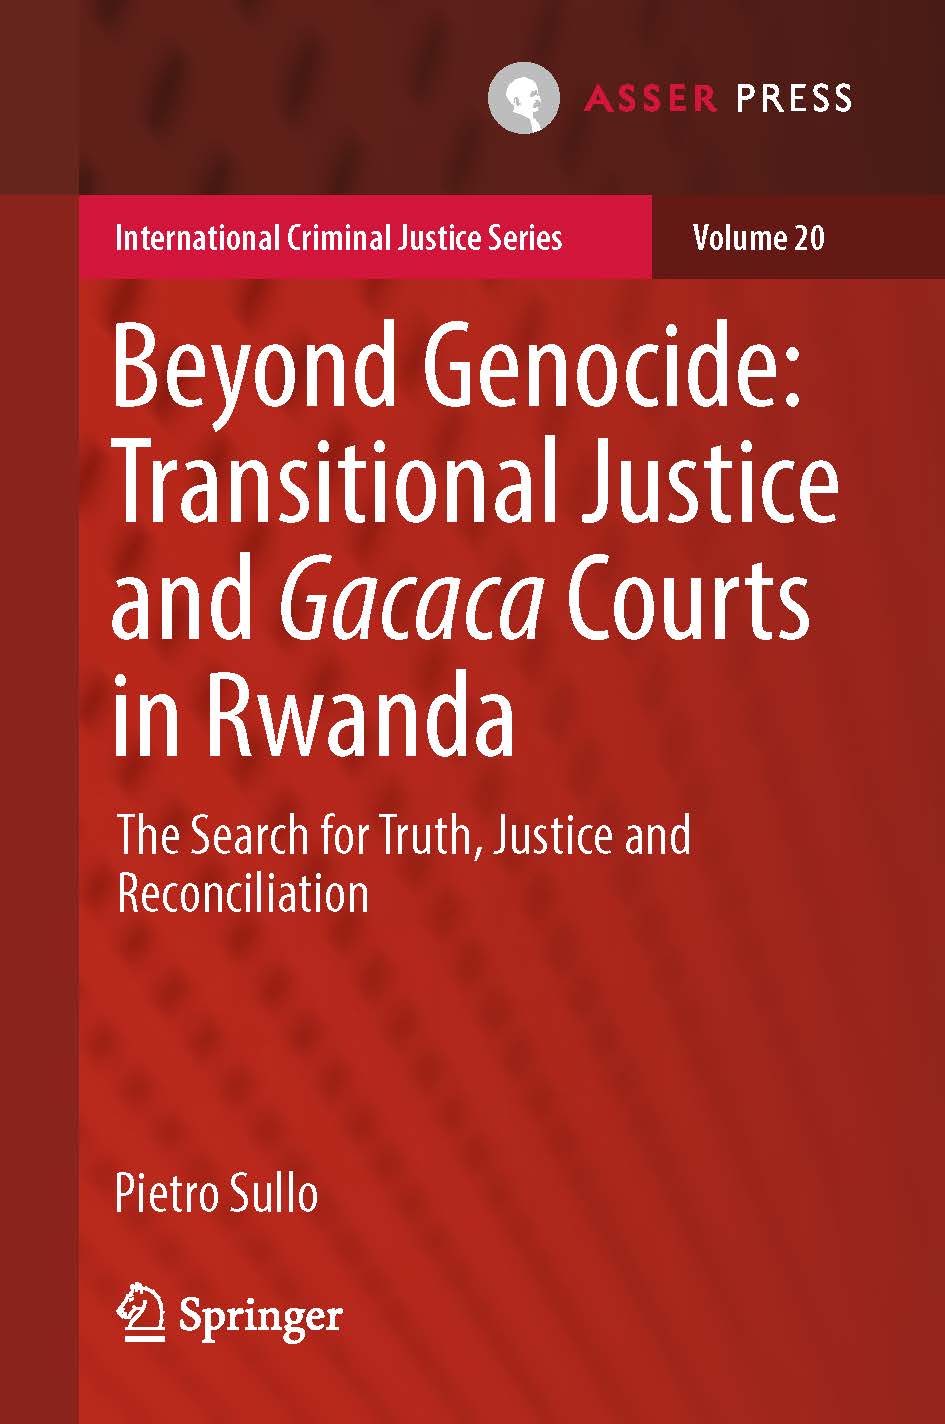 Beyond Genocide: Transitional Justice and Gacaca Courts in Rwanda - The Search for Truth, Justice and Reconciliation